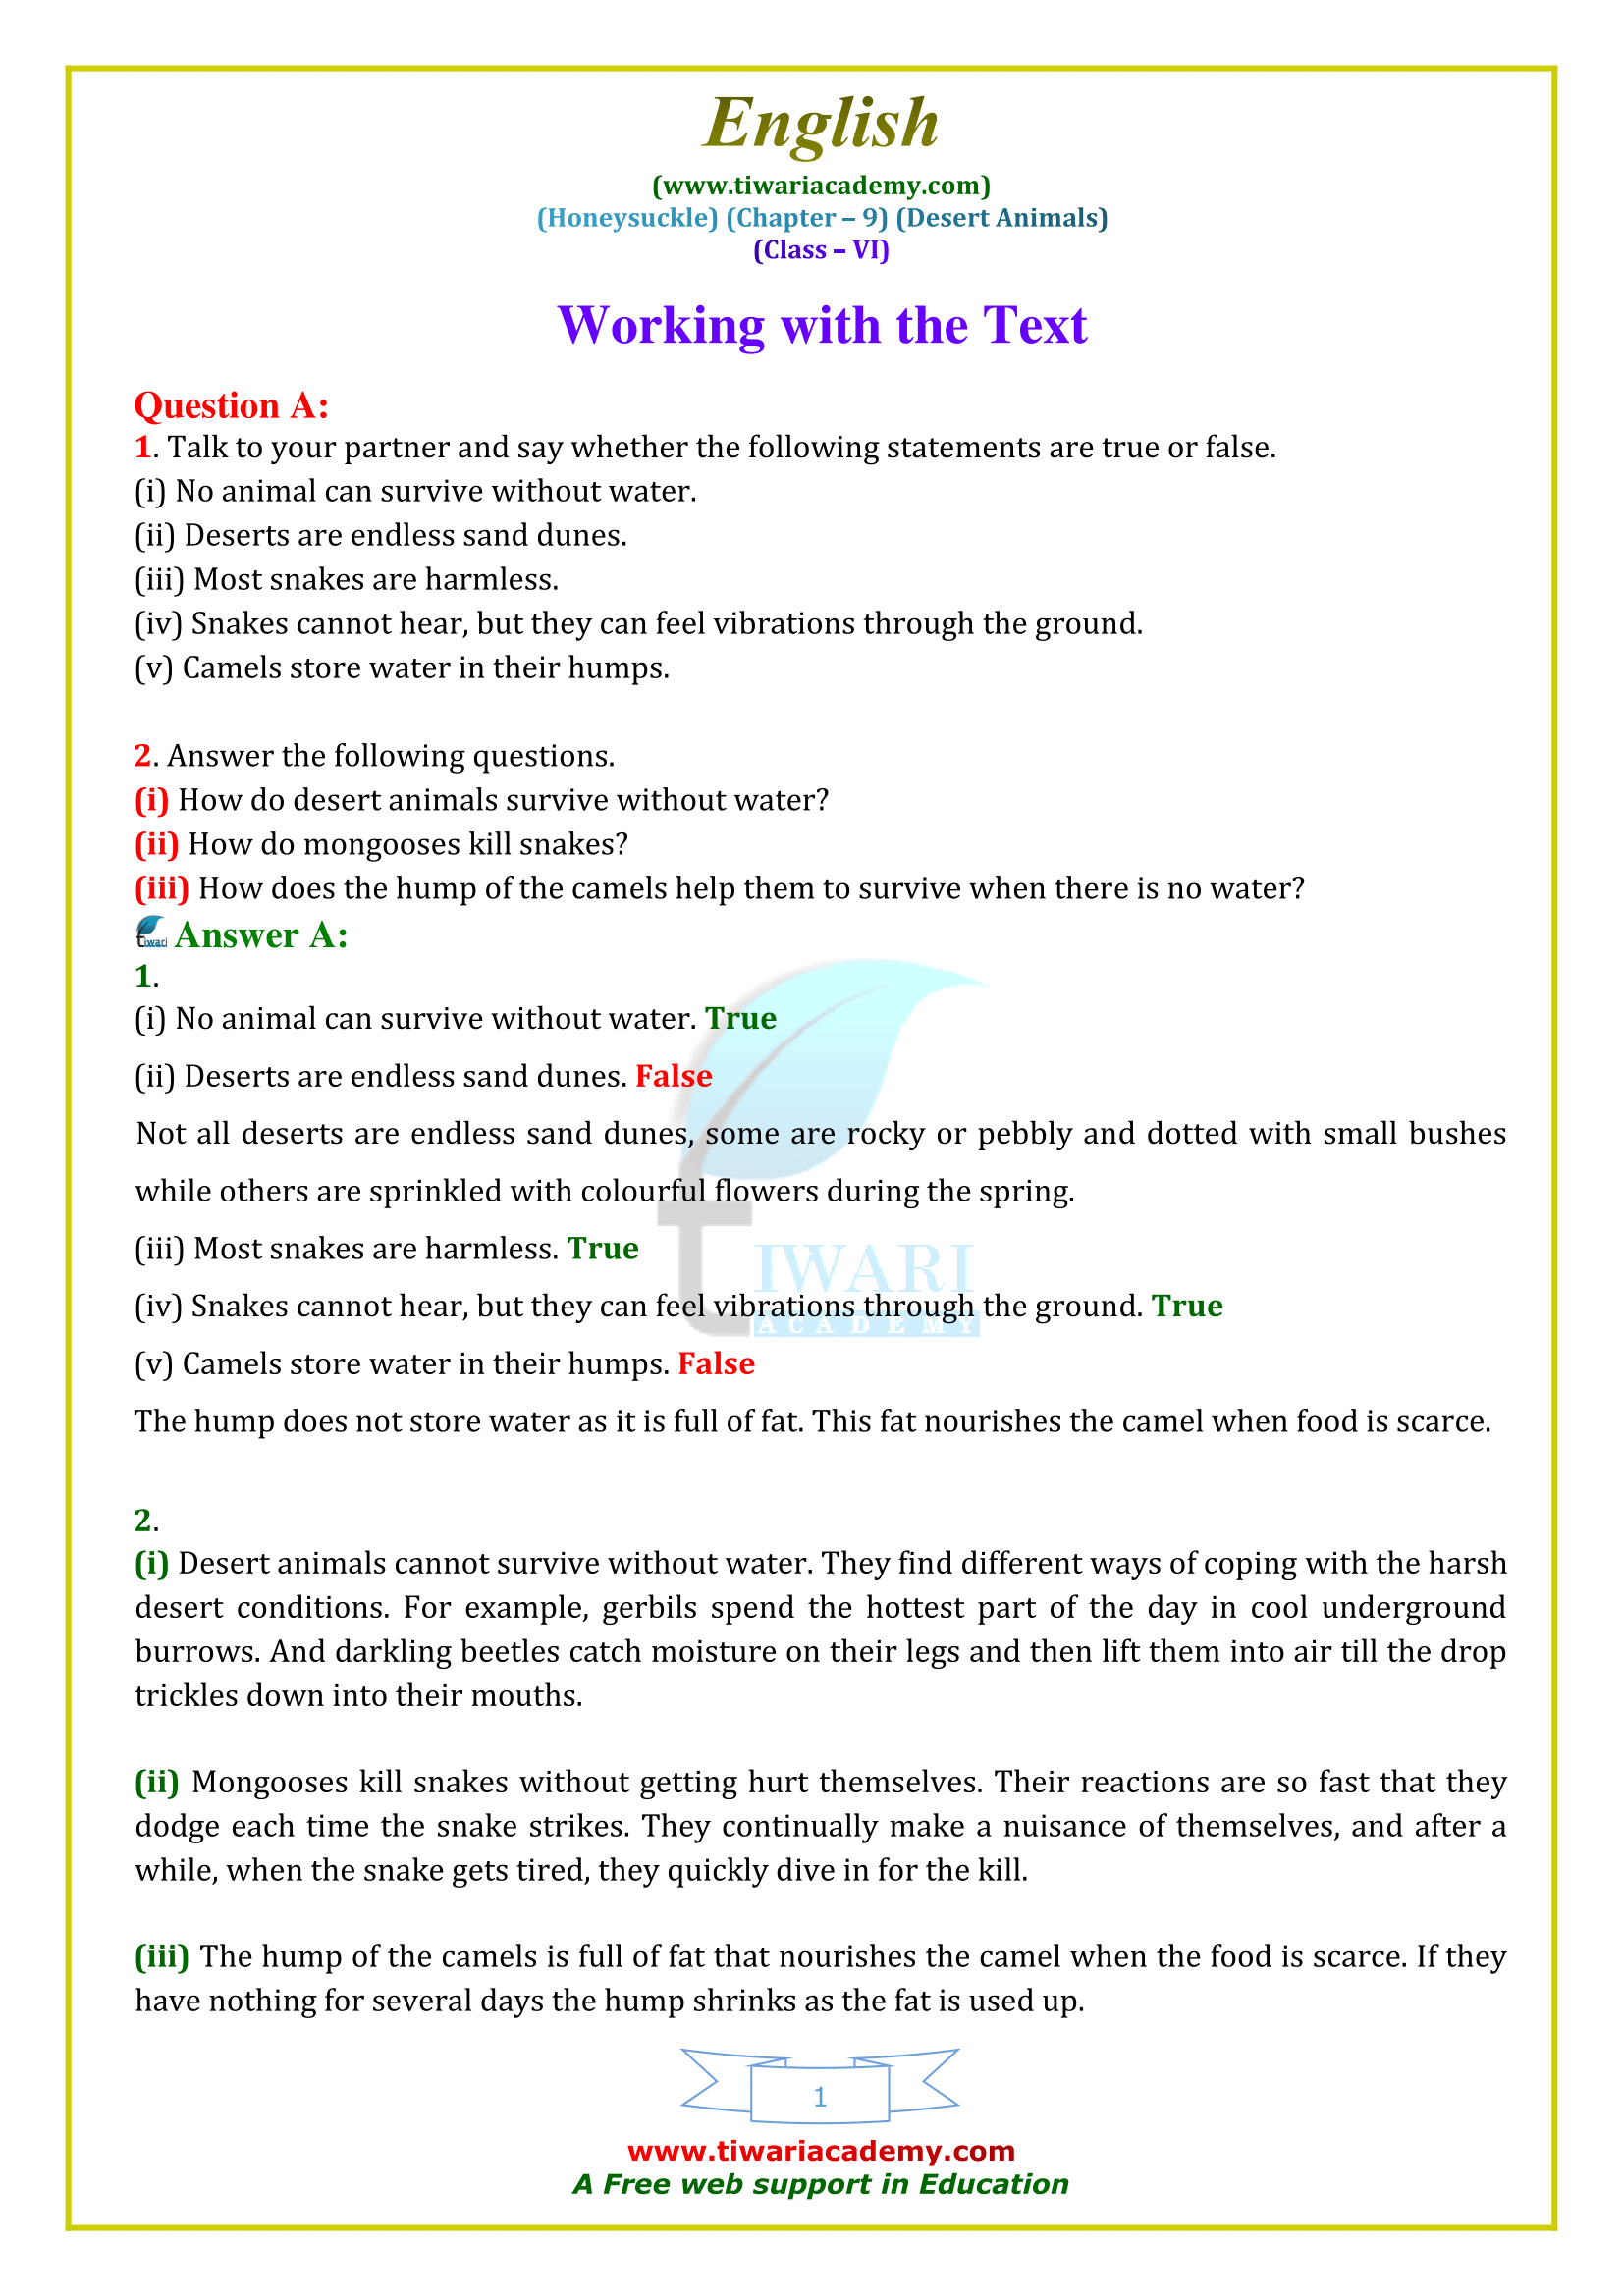 NCERT Solutions for Class 6 English Honeysuckle Chapter 9